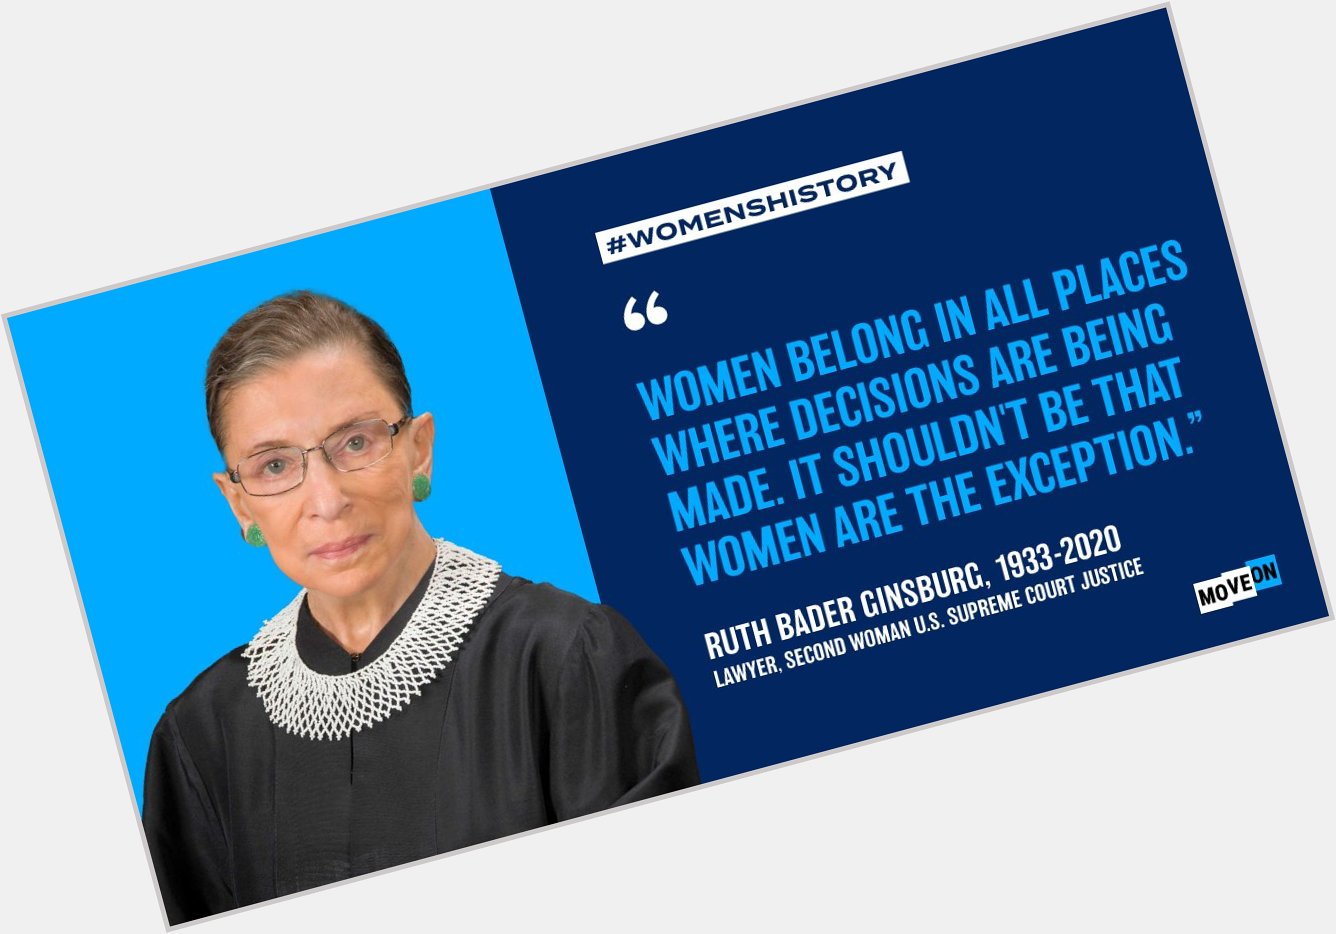 Happy Birthday Ruth Bader Ginsburg! We honor your memory this and always. Your legacy lives on. 